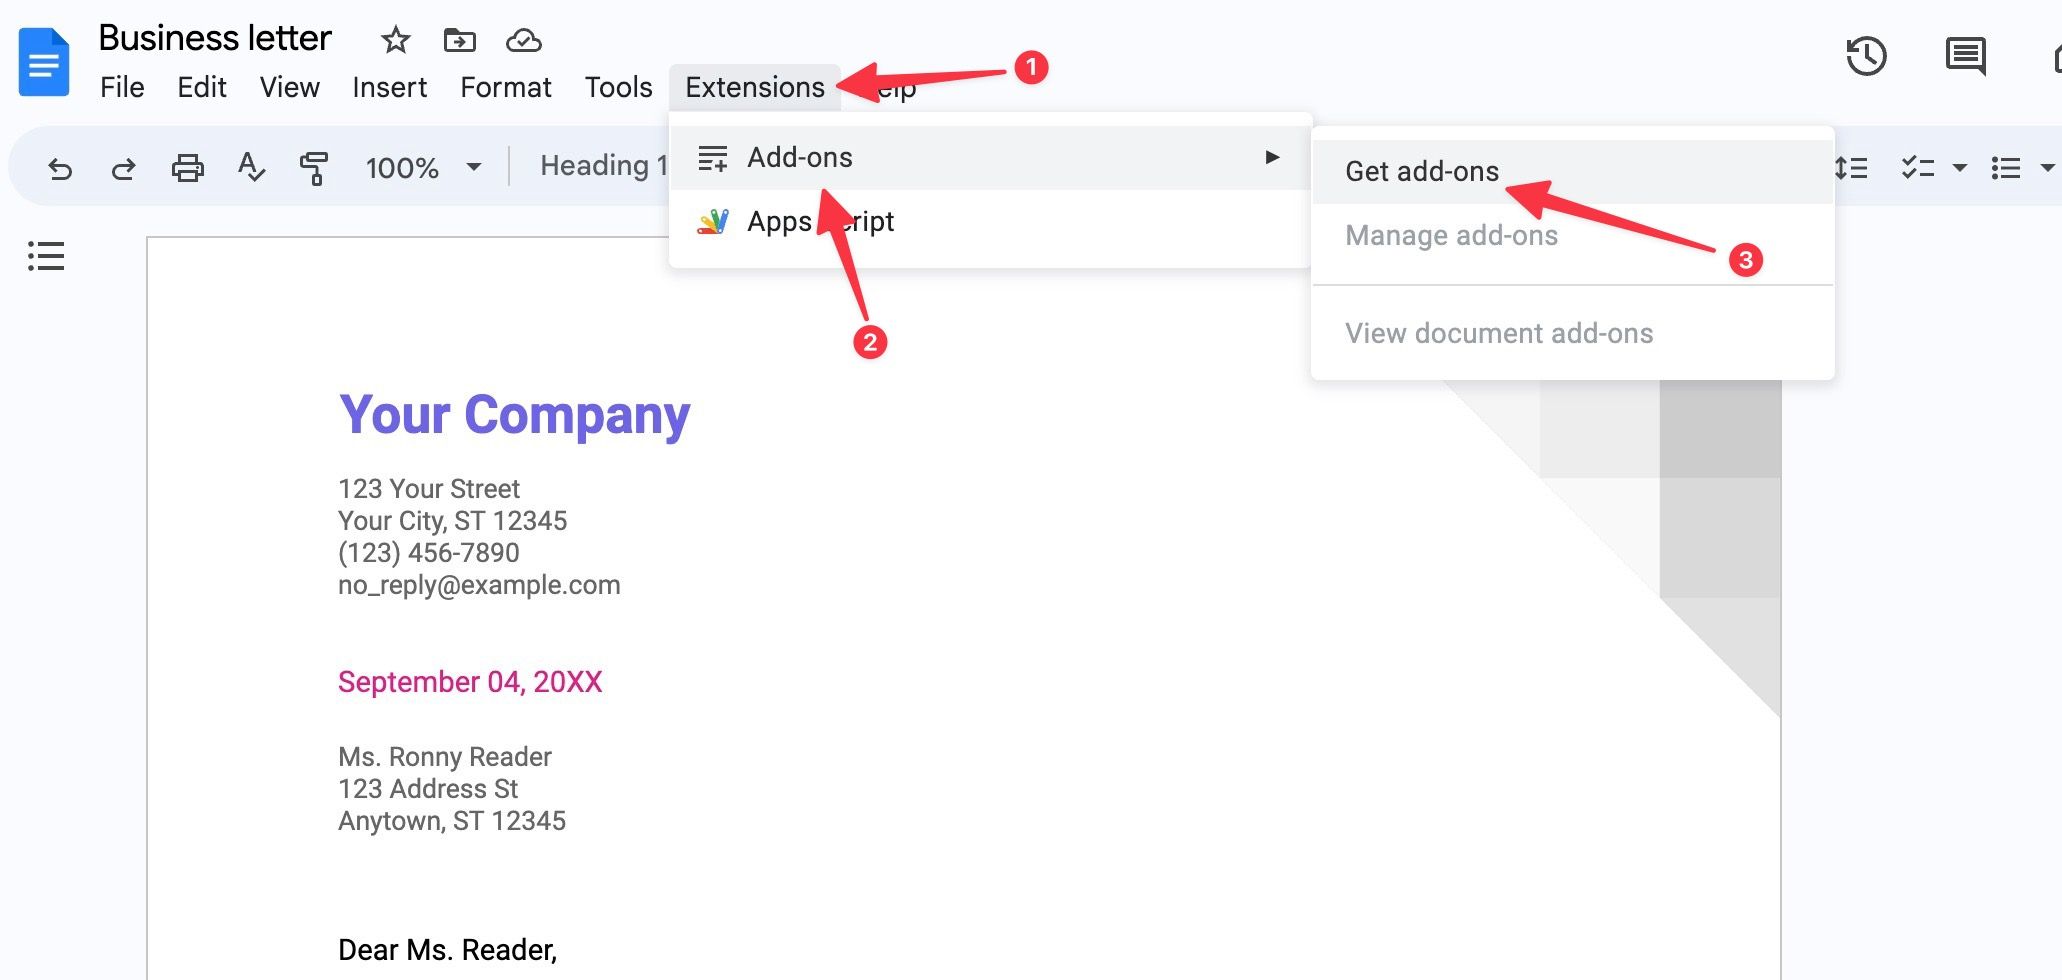 get add-ons in Google Docs